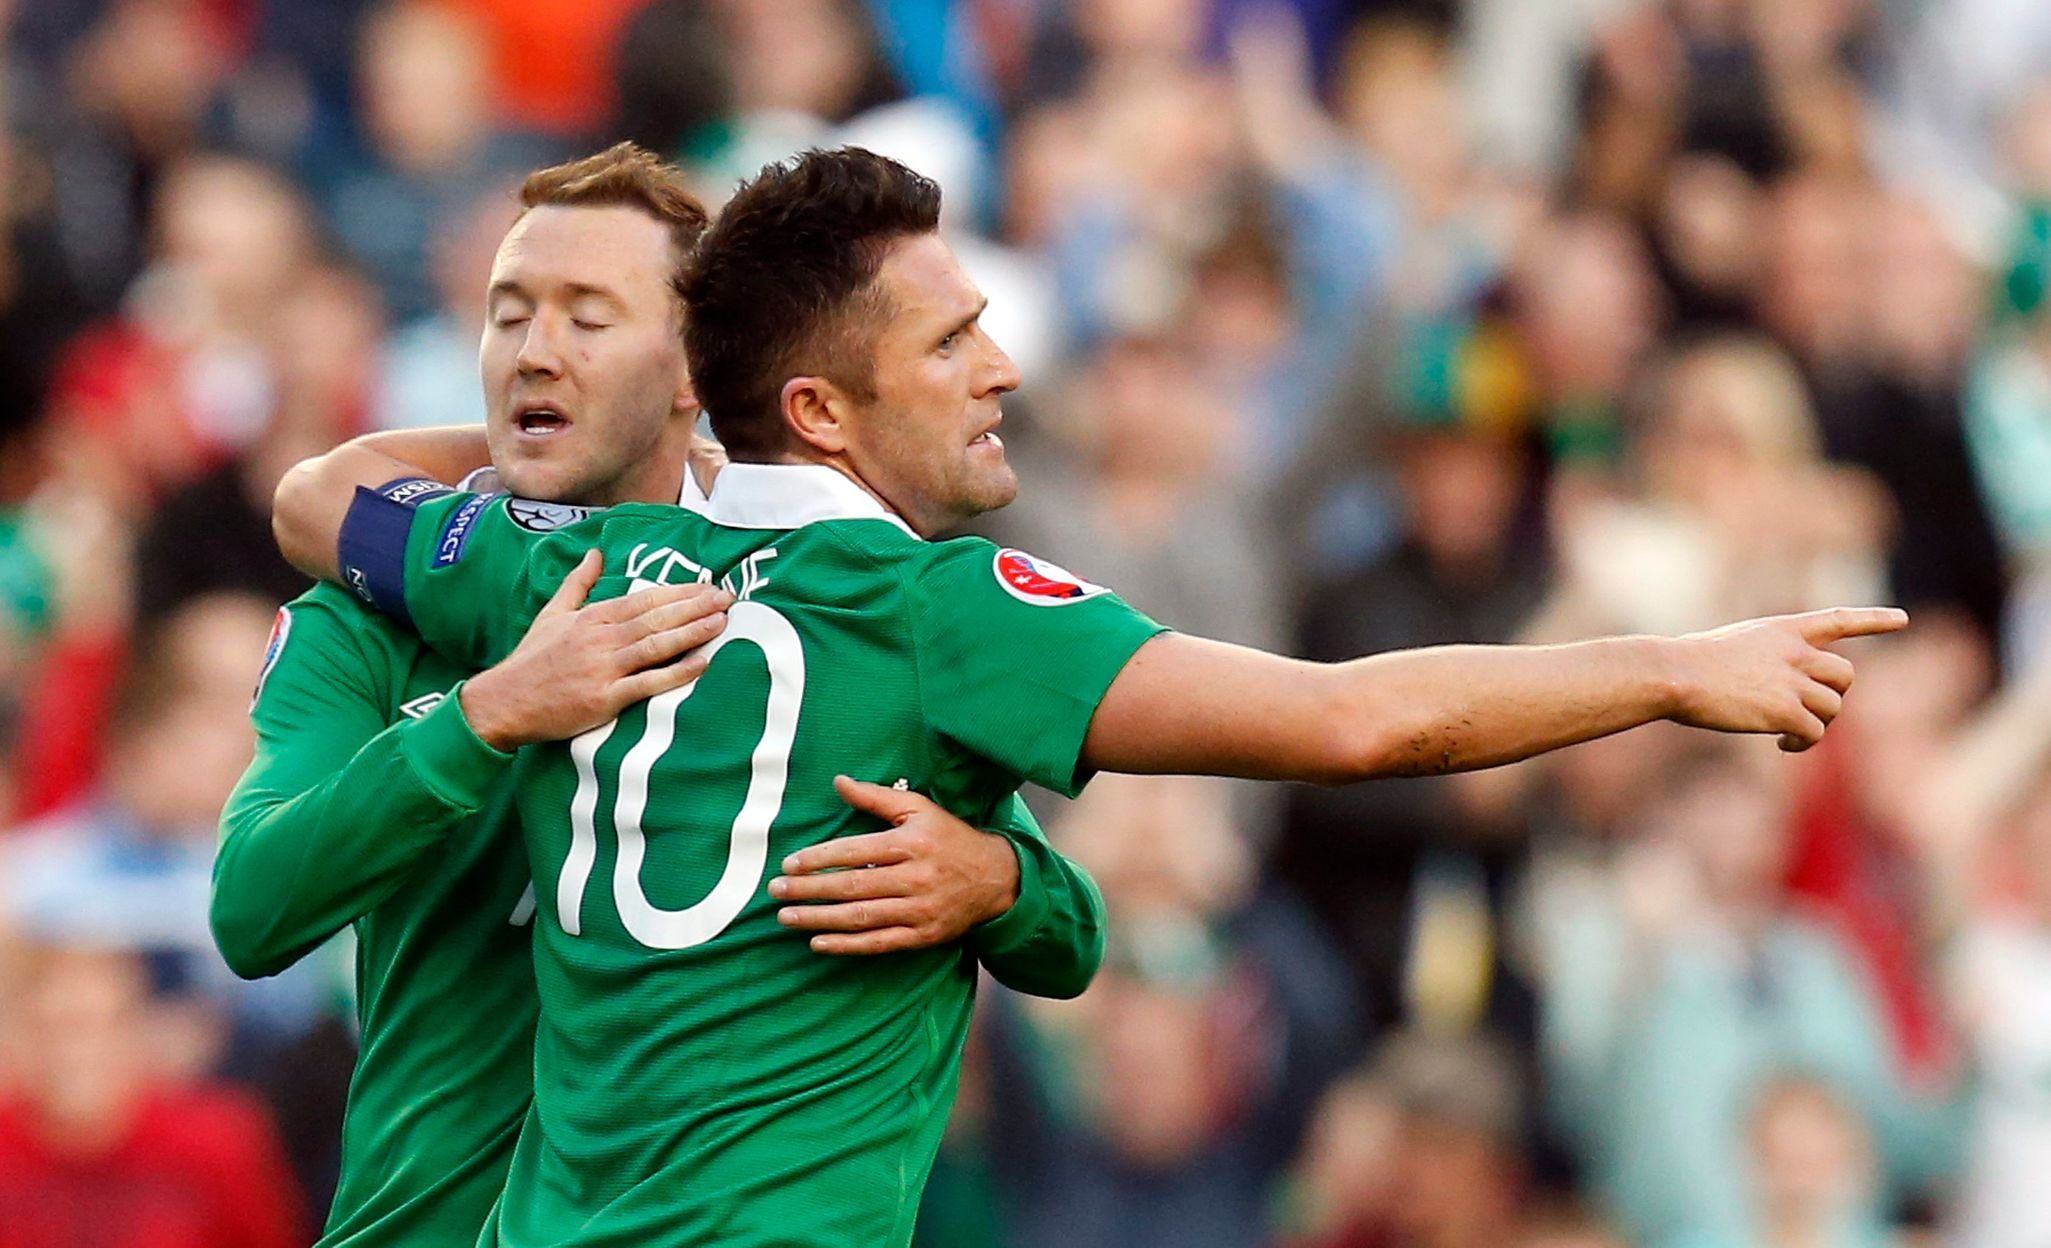 Ireland's Keane is congratulated by McGeady after scoring against Gibraltar during their Euro 2016 qualifying match in Dublin